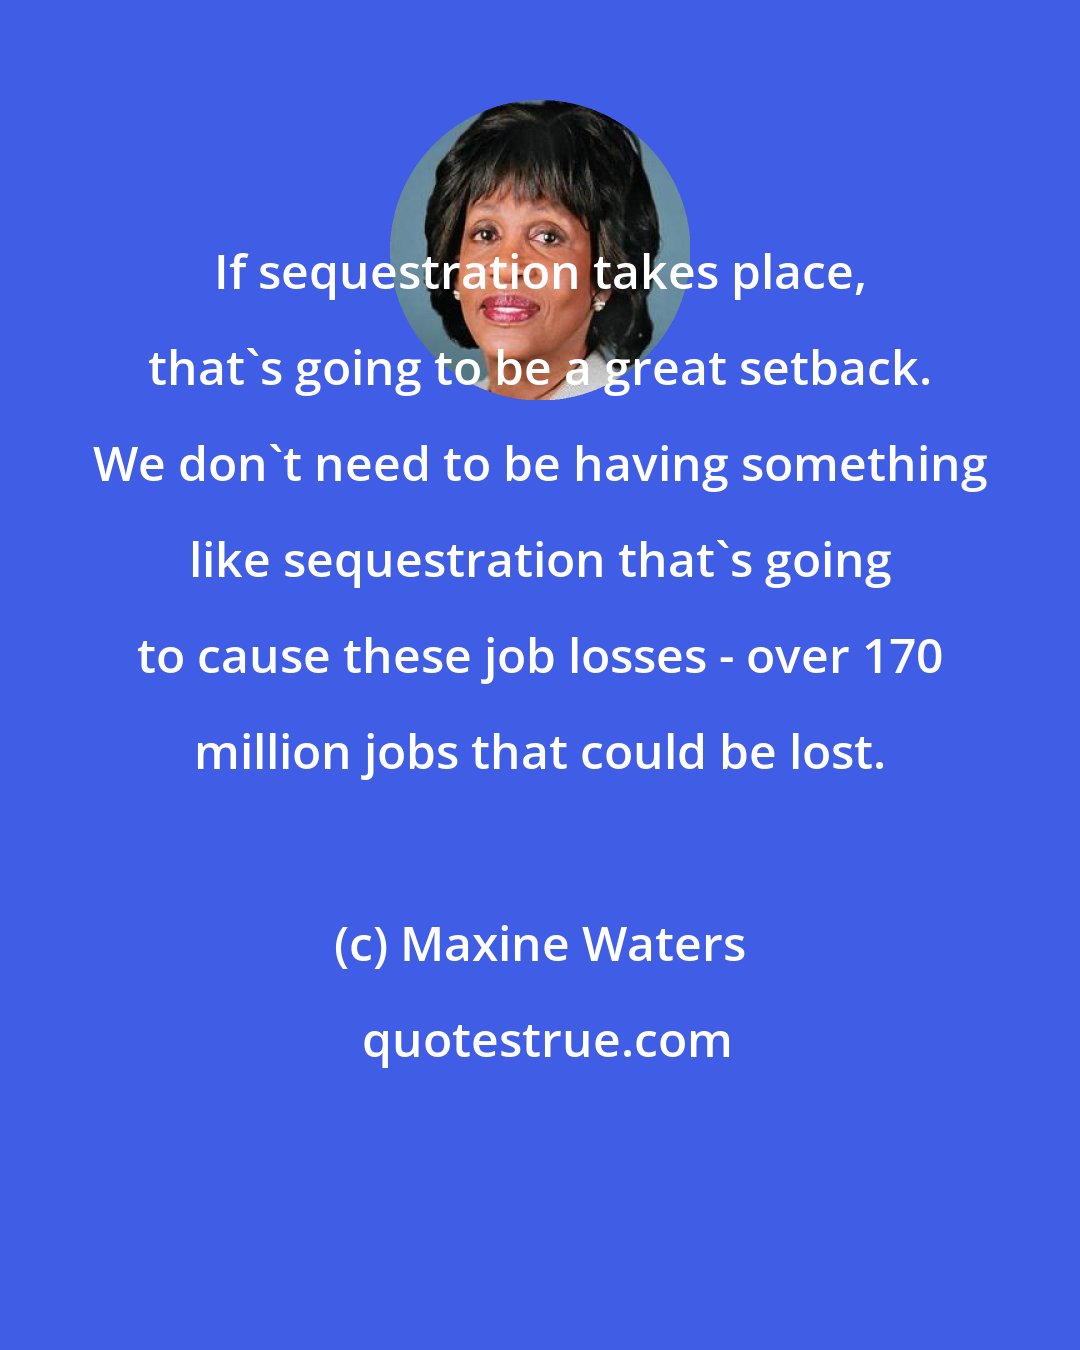 Maxine Waters: If sequestration takes place, that's going to be a great setback. We don't need to be having something like sequestration that's going to cause these job losses - over 170 million jobs that could be lost.